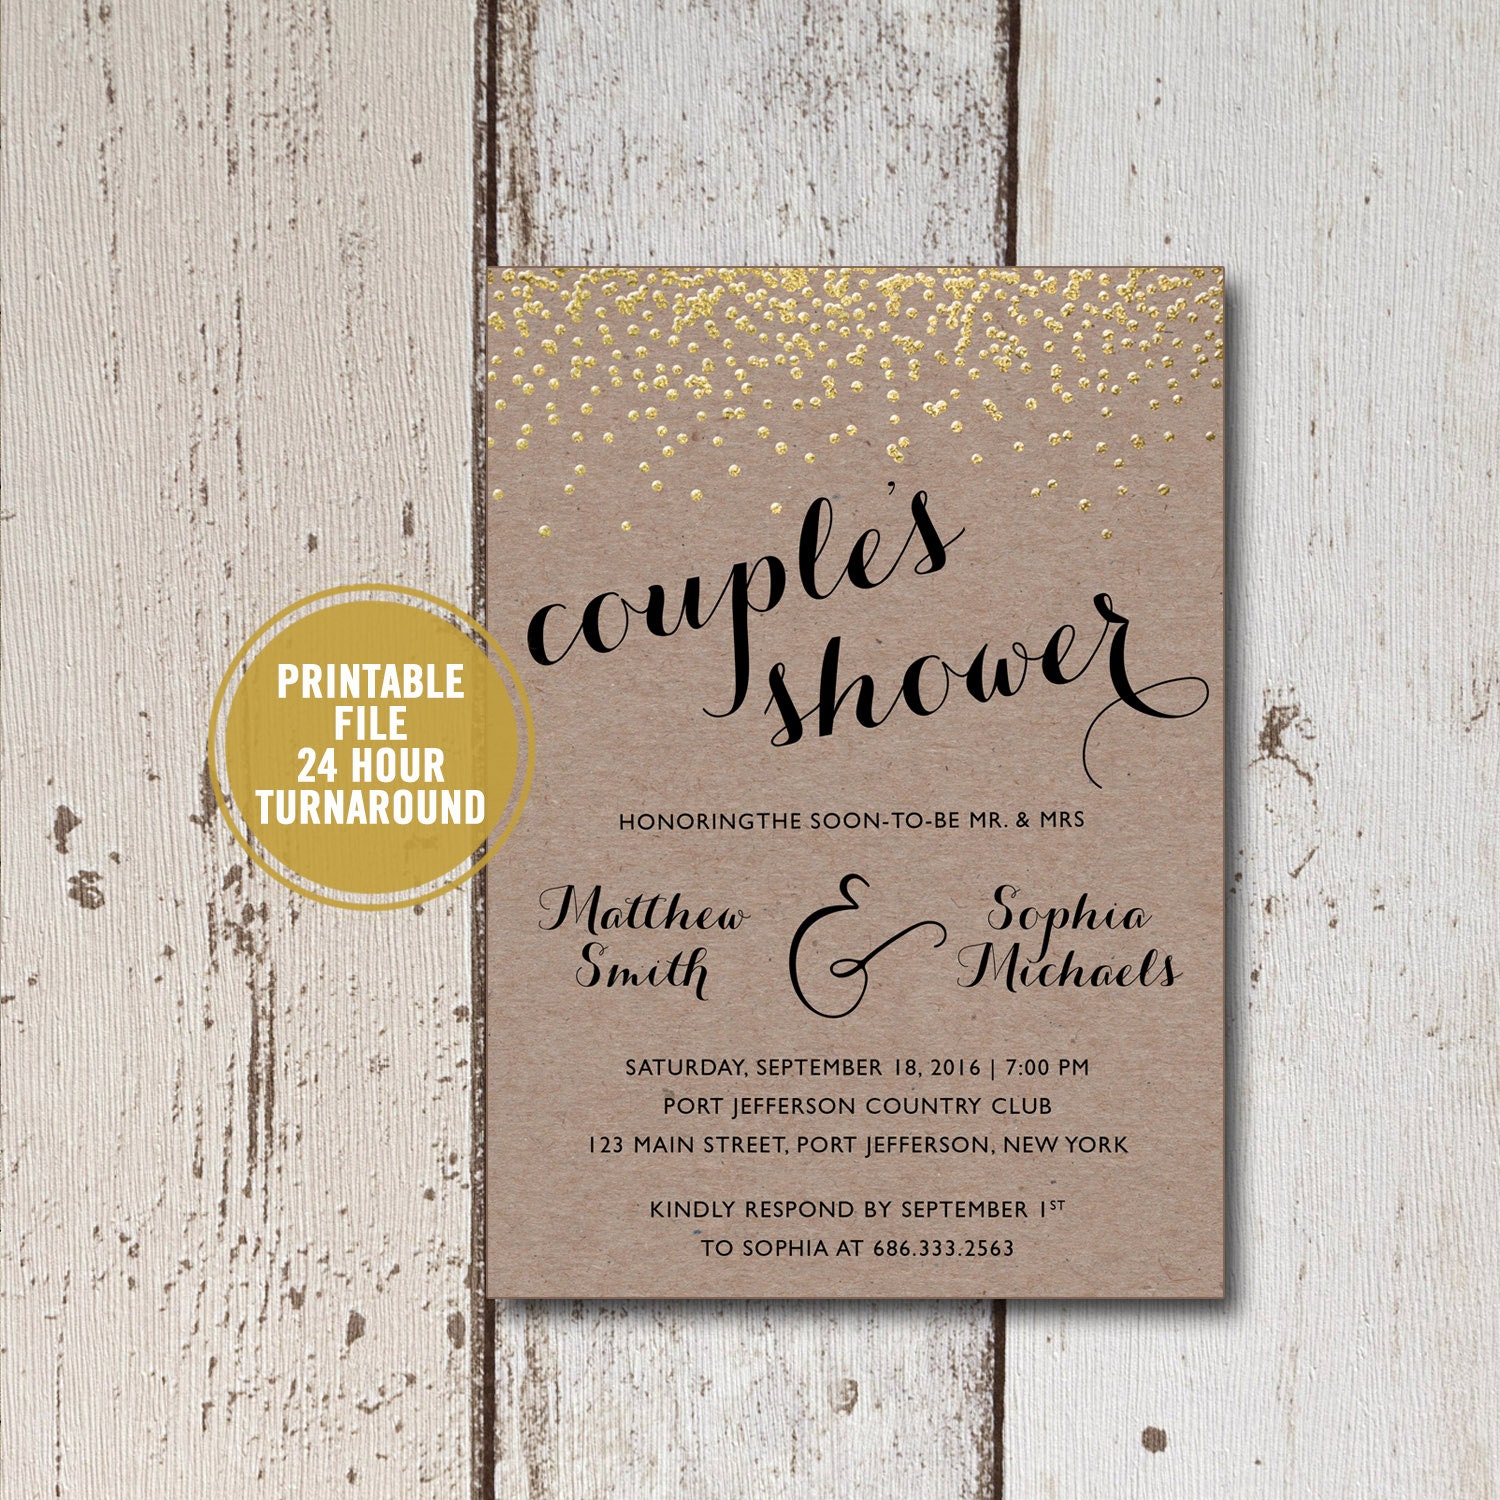 couples shower invitations Couples wedding shower invitations templates ...